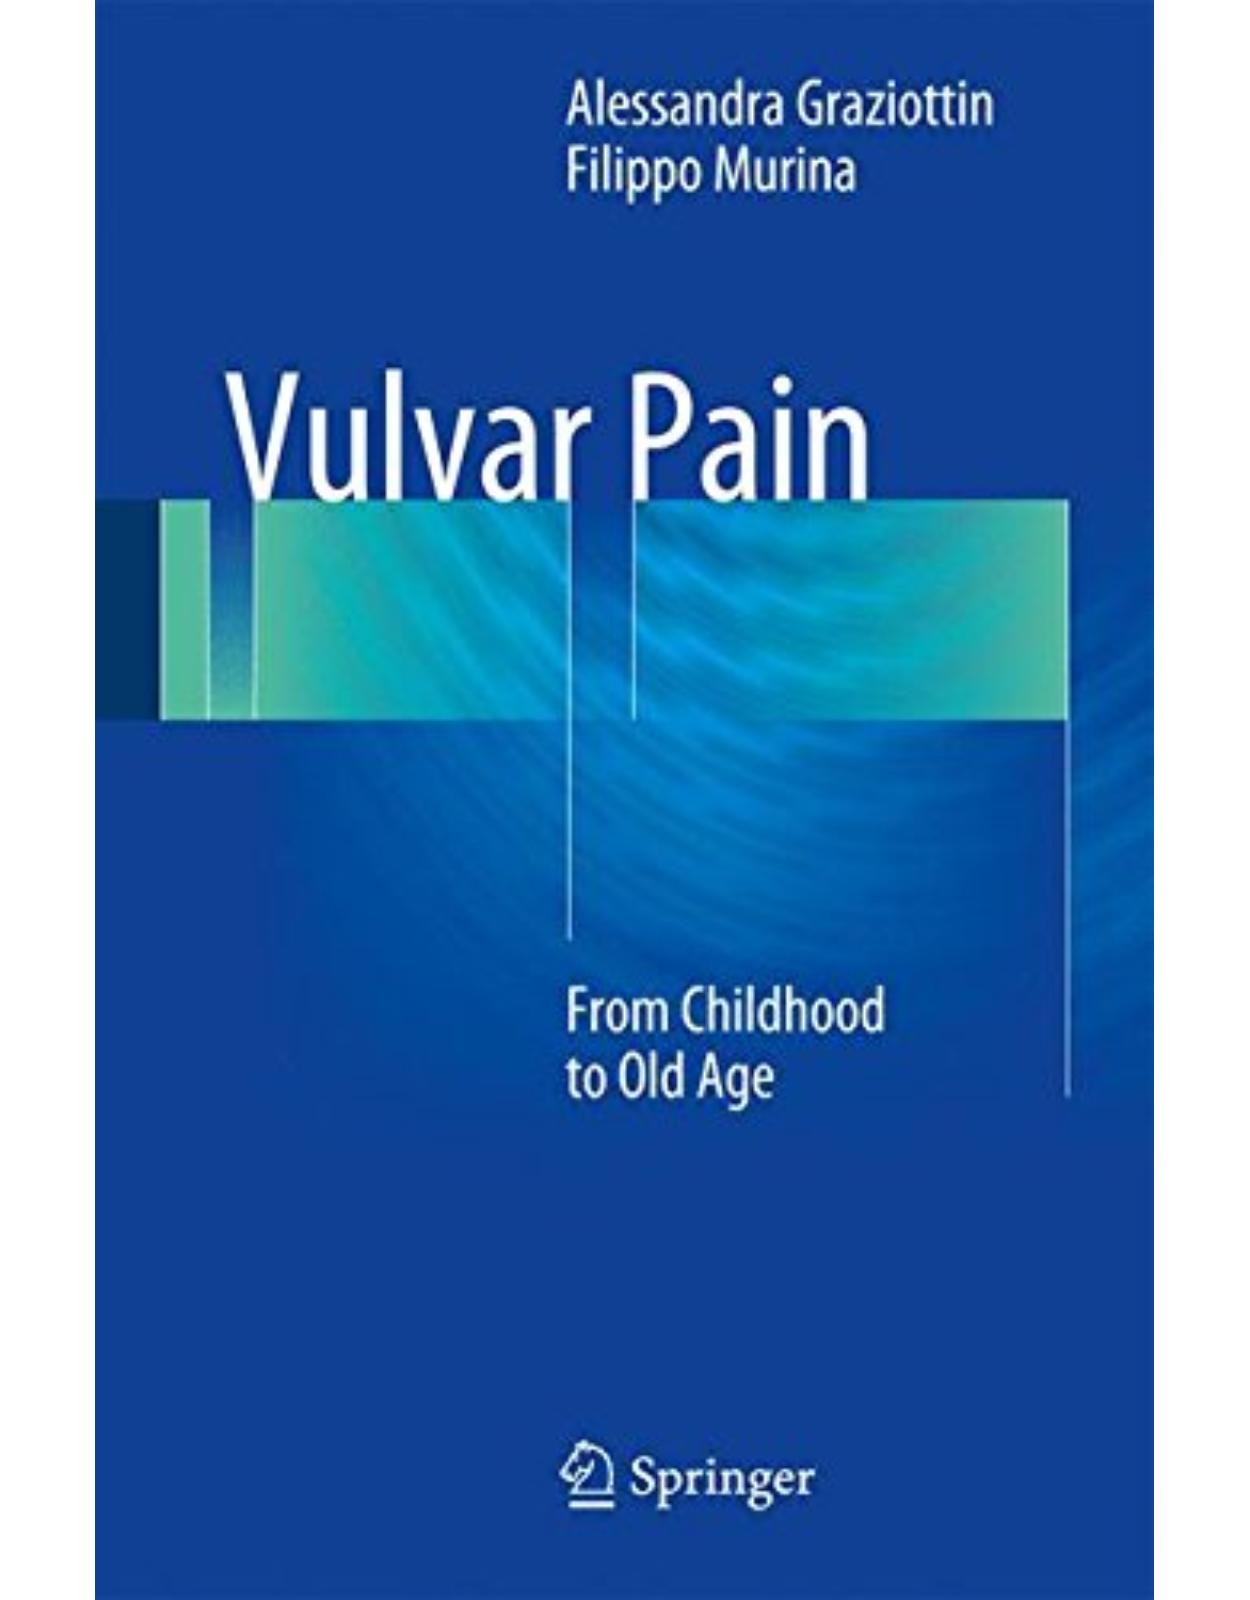 Vulvar Pain: From Childhood to Old Age